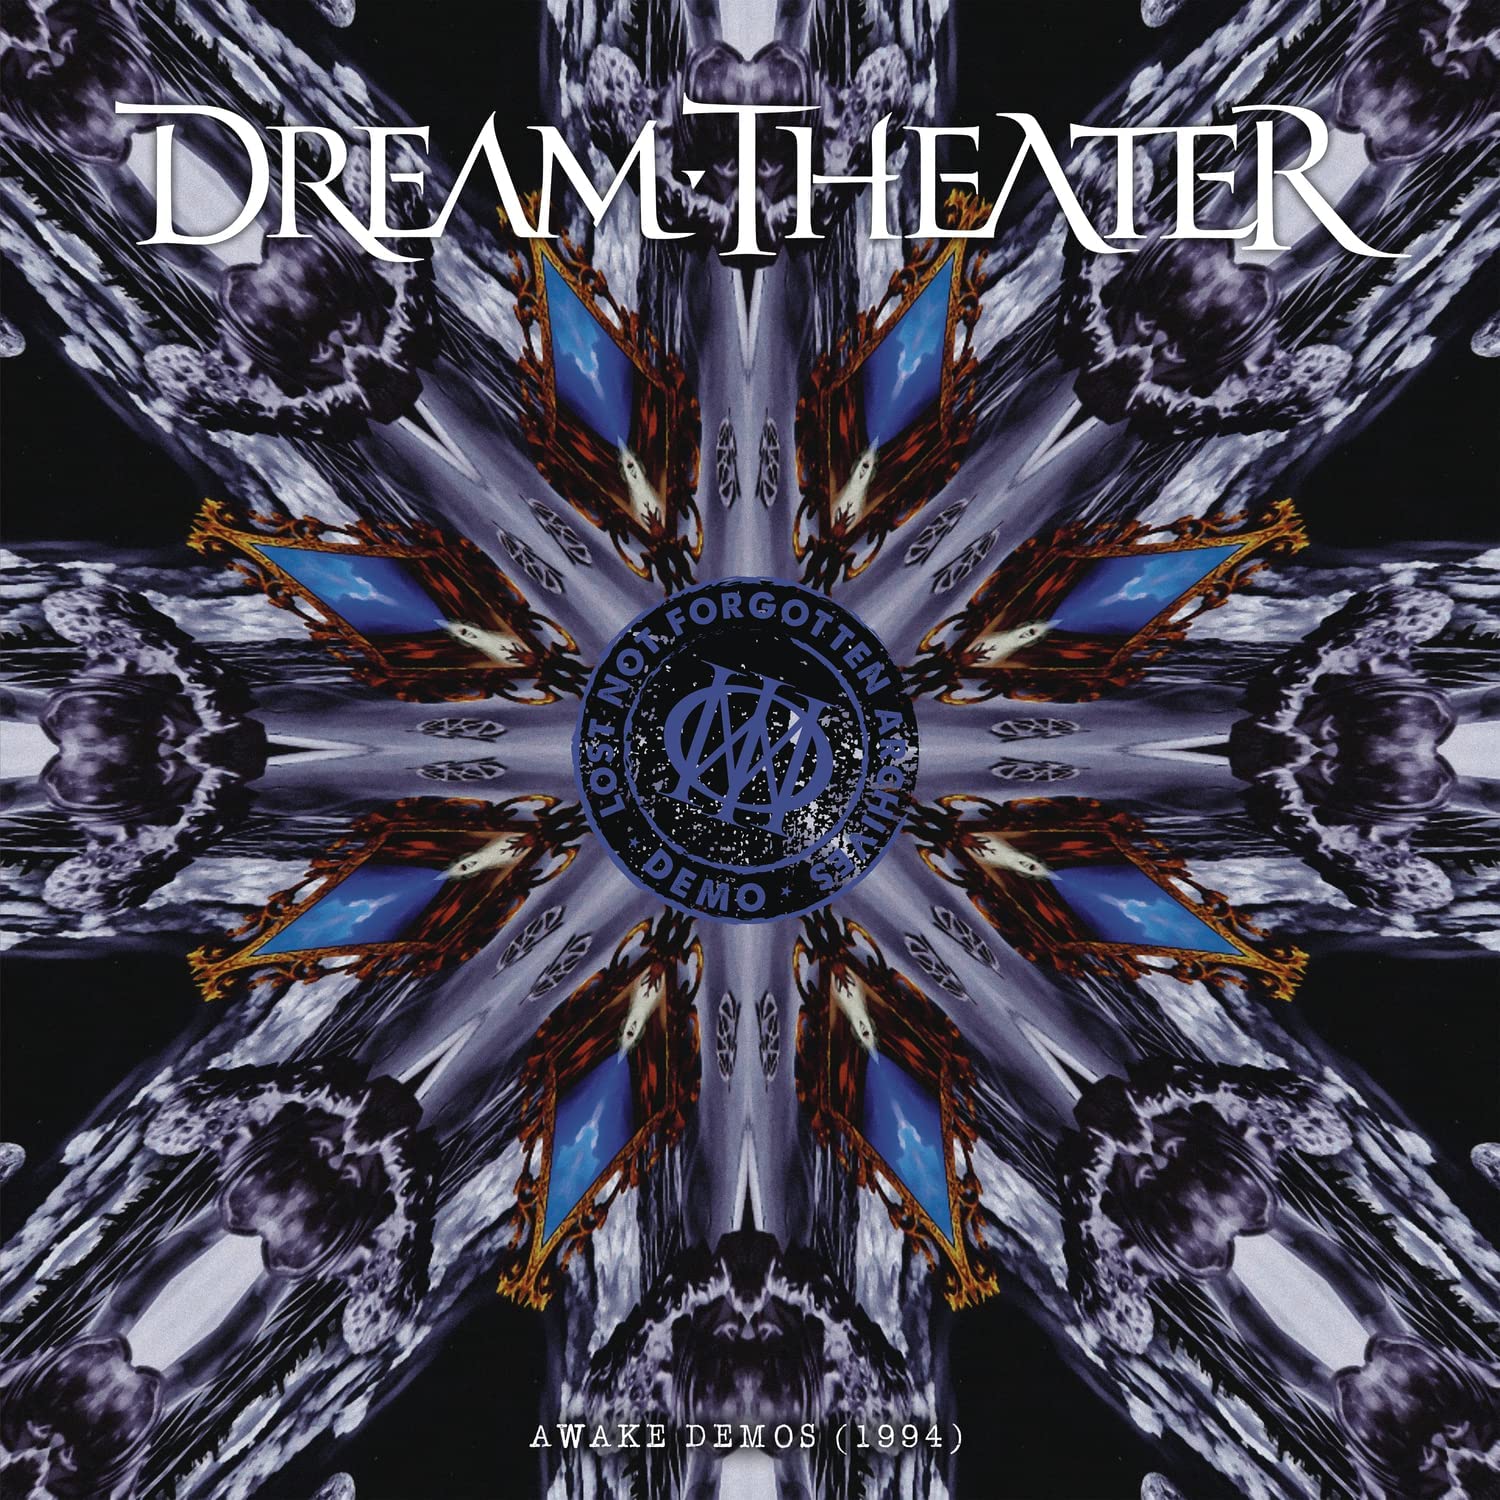 Lost Not Forgotten Archives: Awake Demos | Dream Theater image